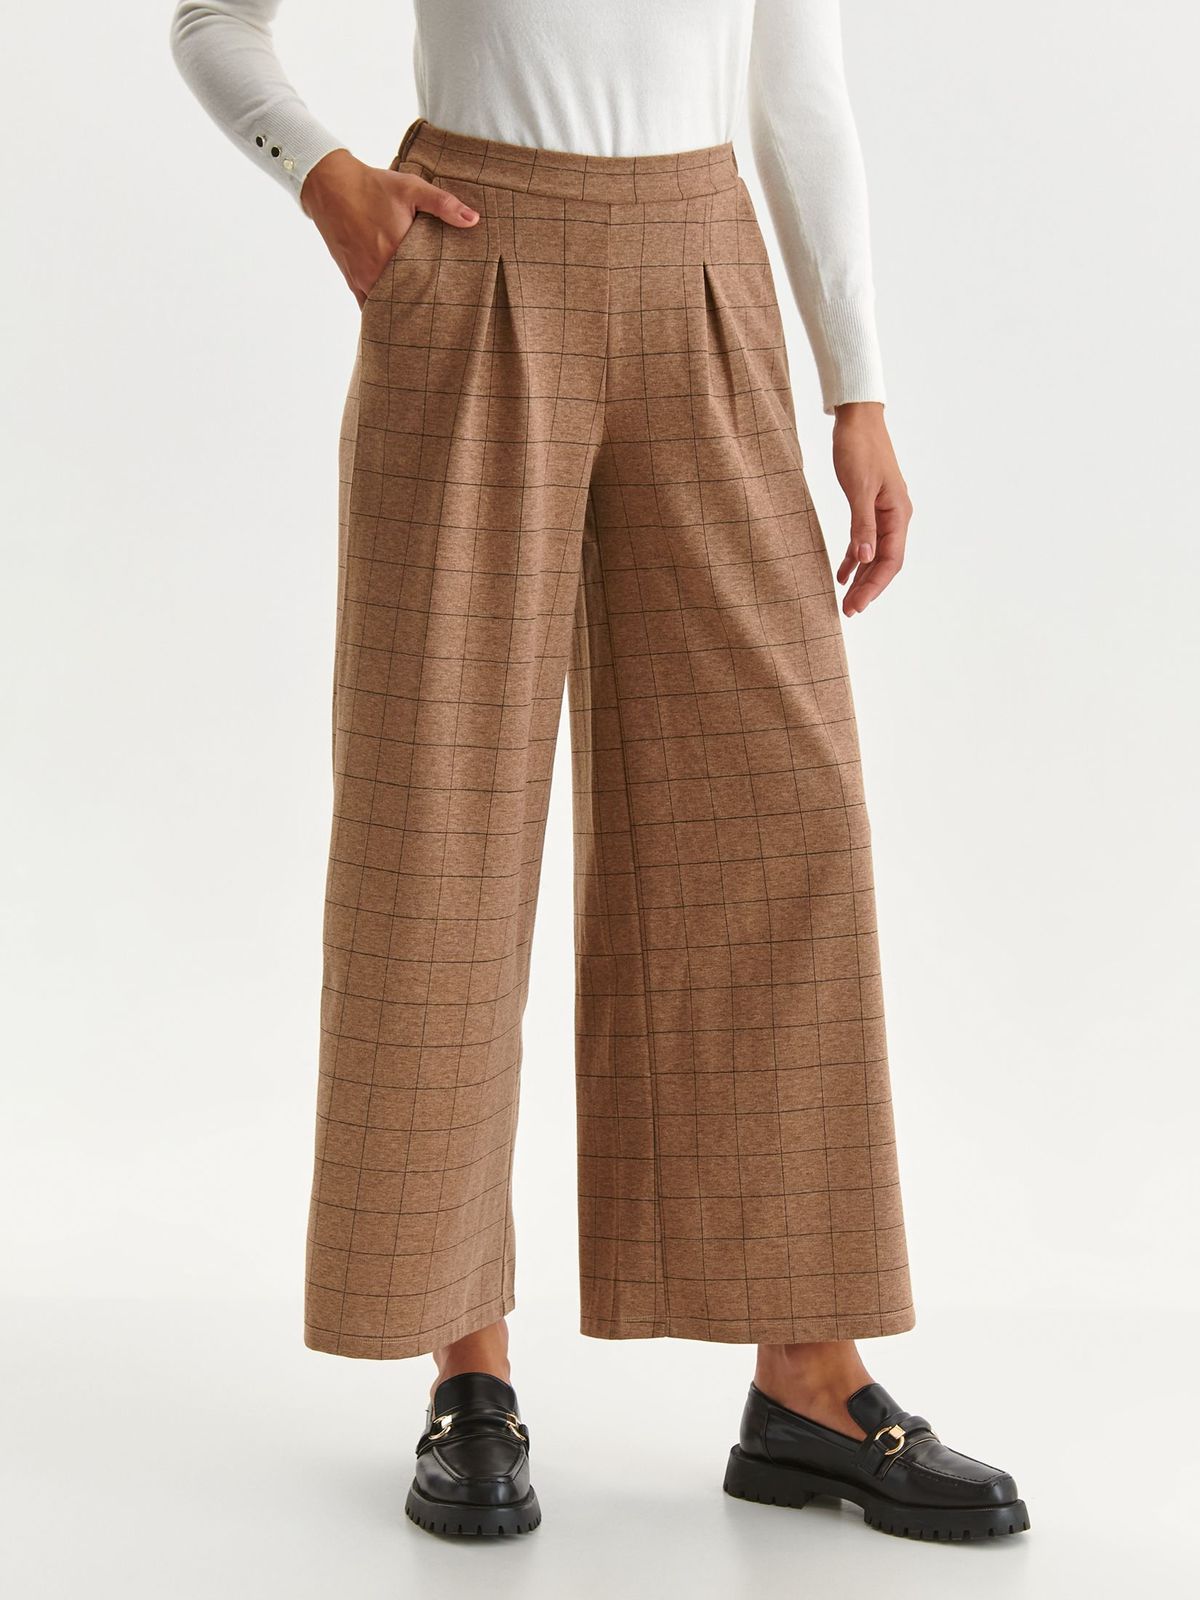 Lightbrown trousers cloth loose fit with pockets